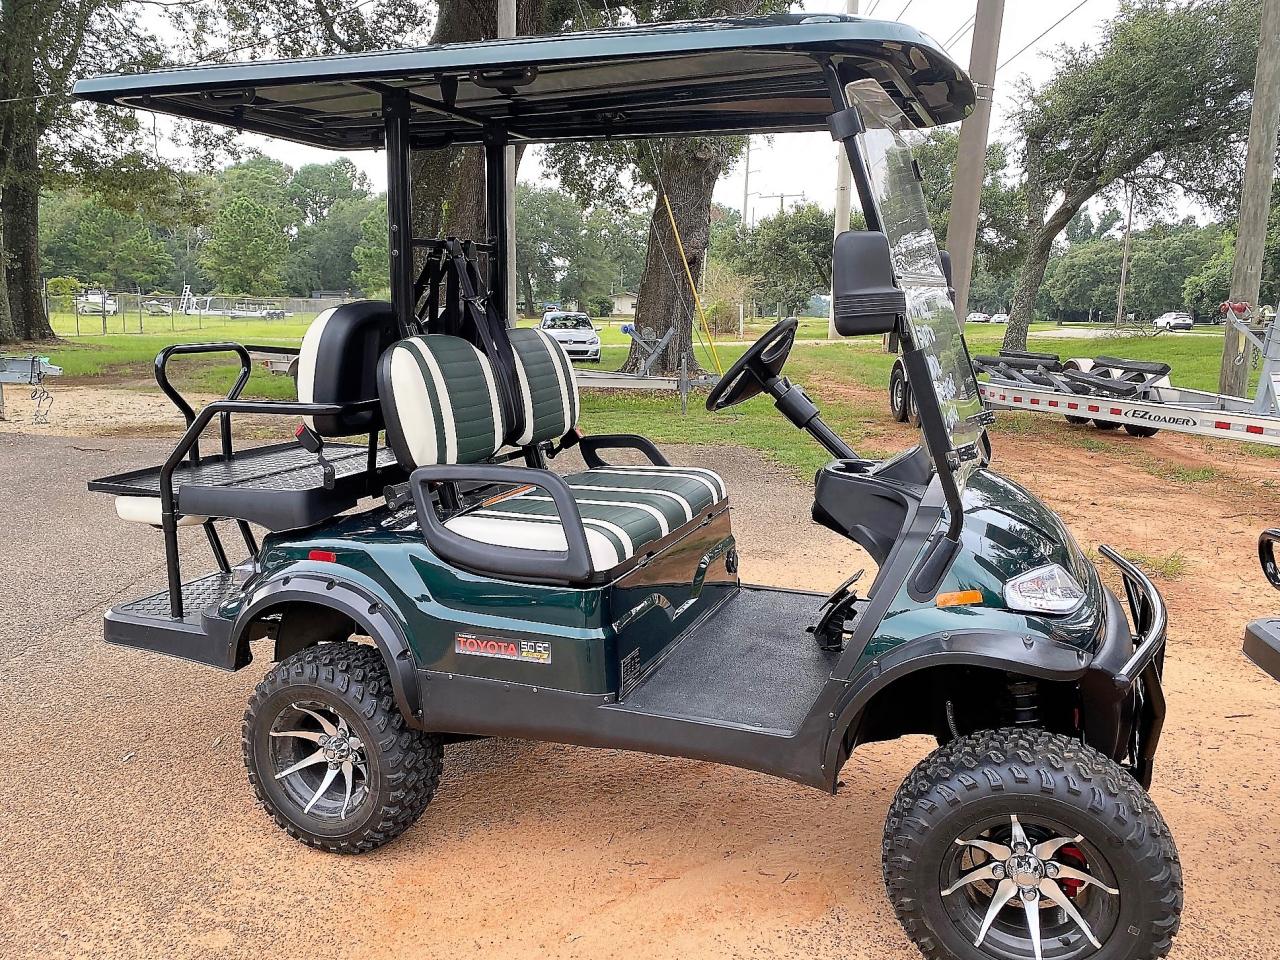 Own Your Ride: Discover Used Golf Carts for Sale by Owners in Shelby, Alabama